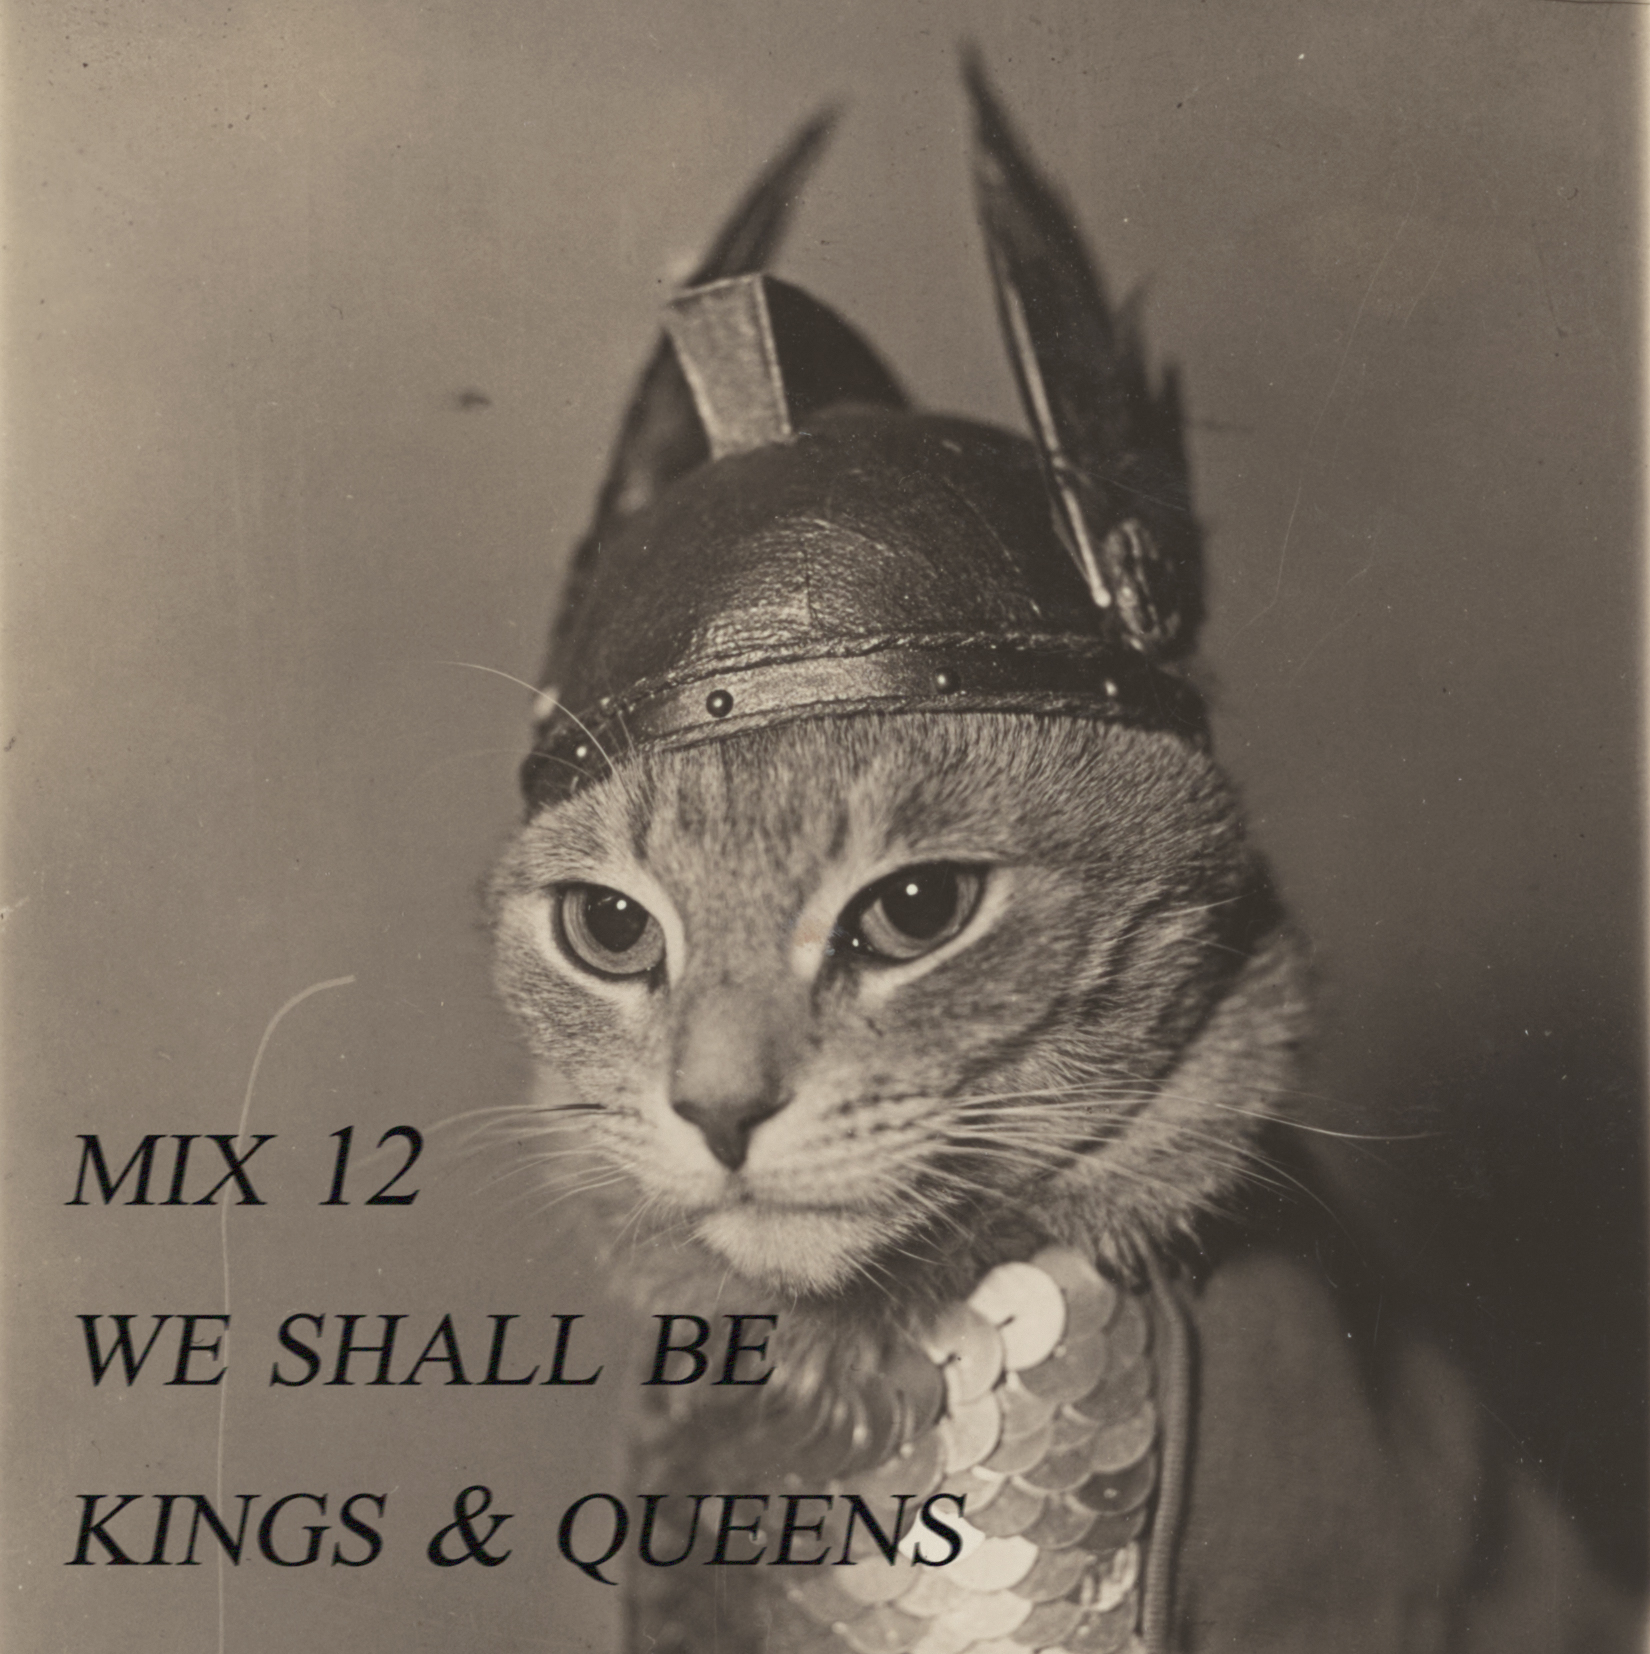 Mix 12 – We shall be kings & queens